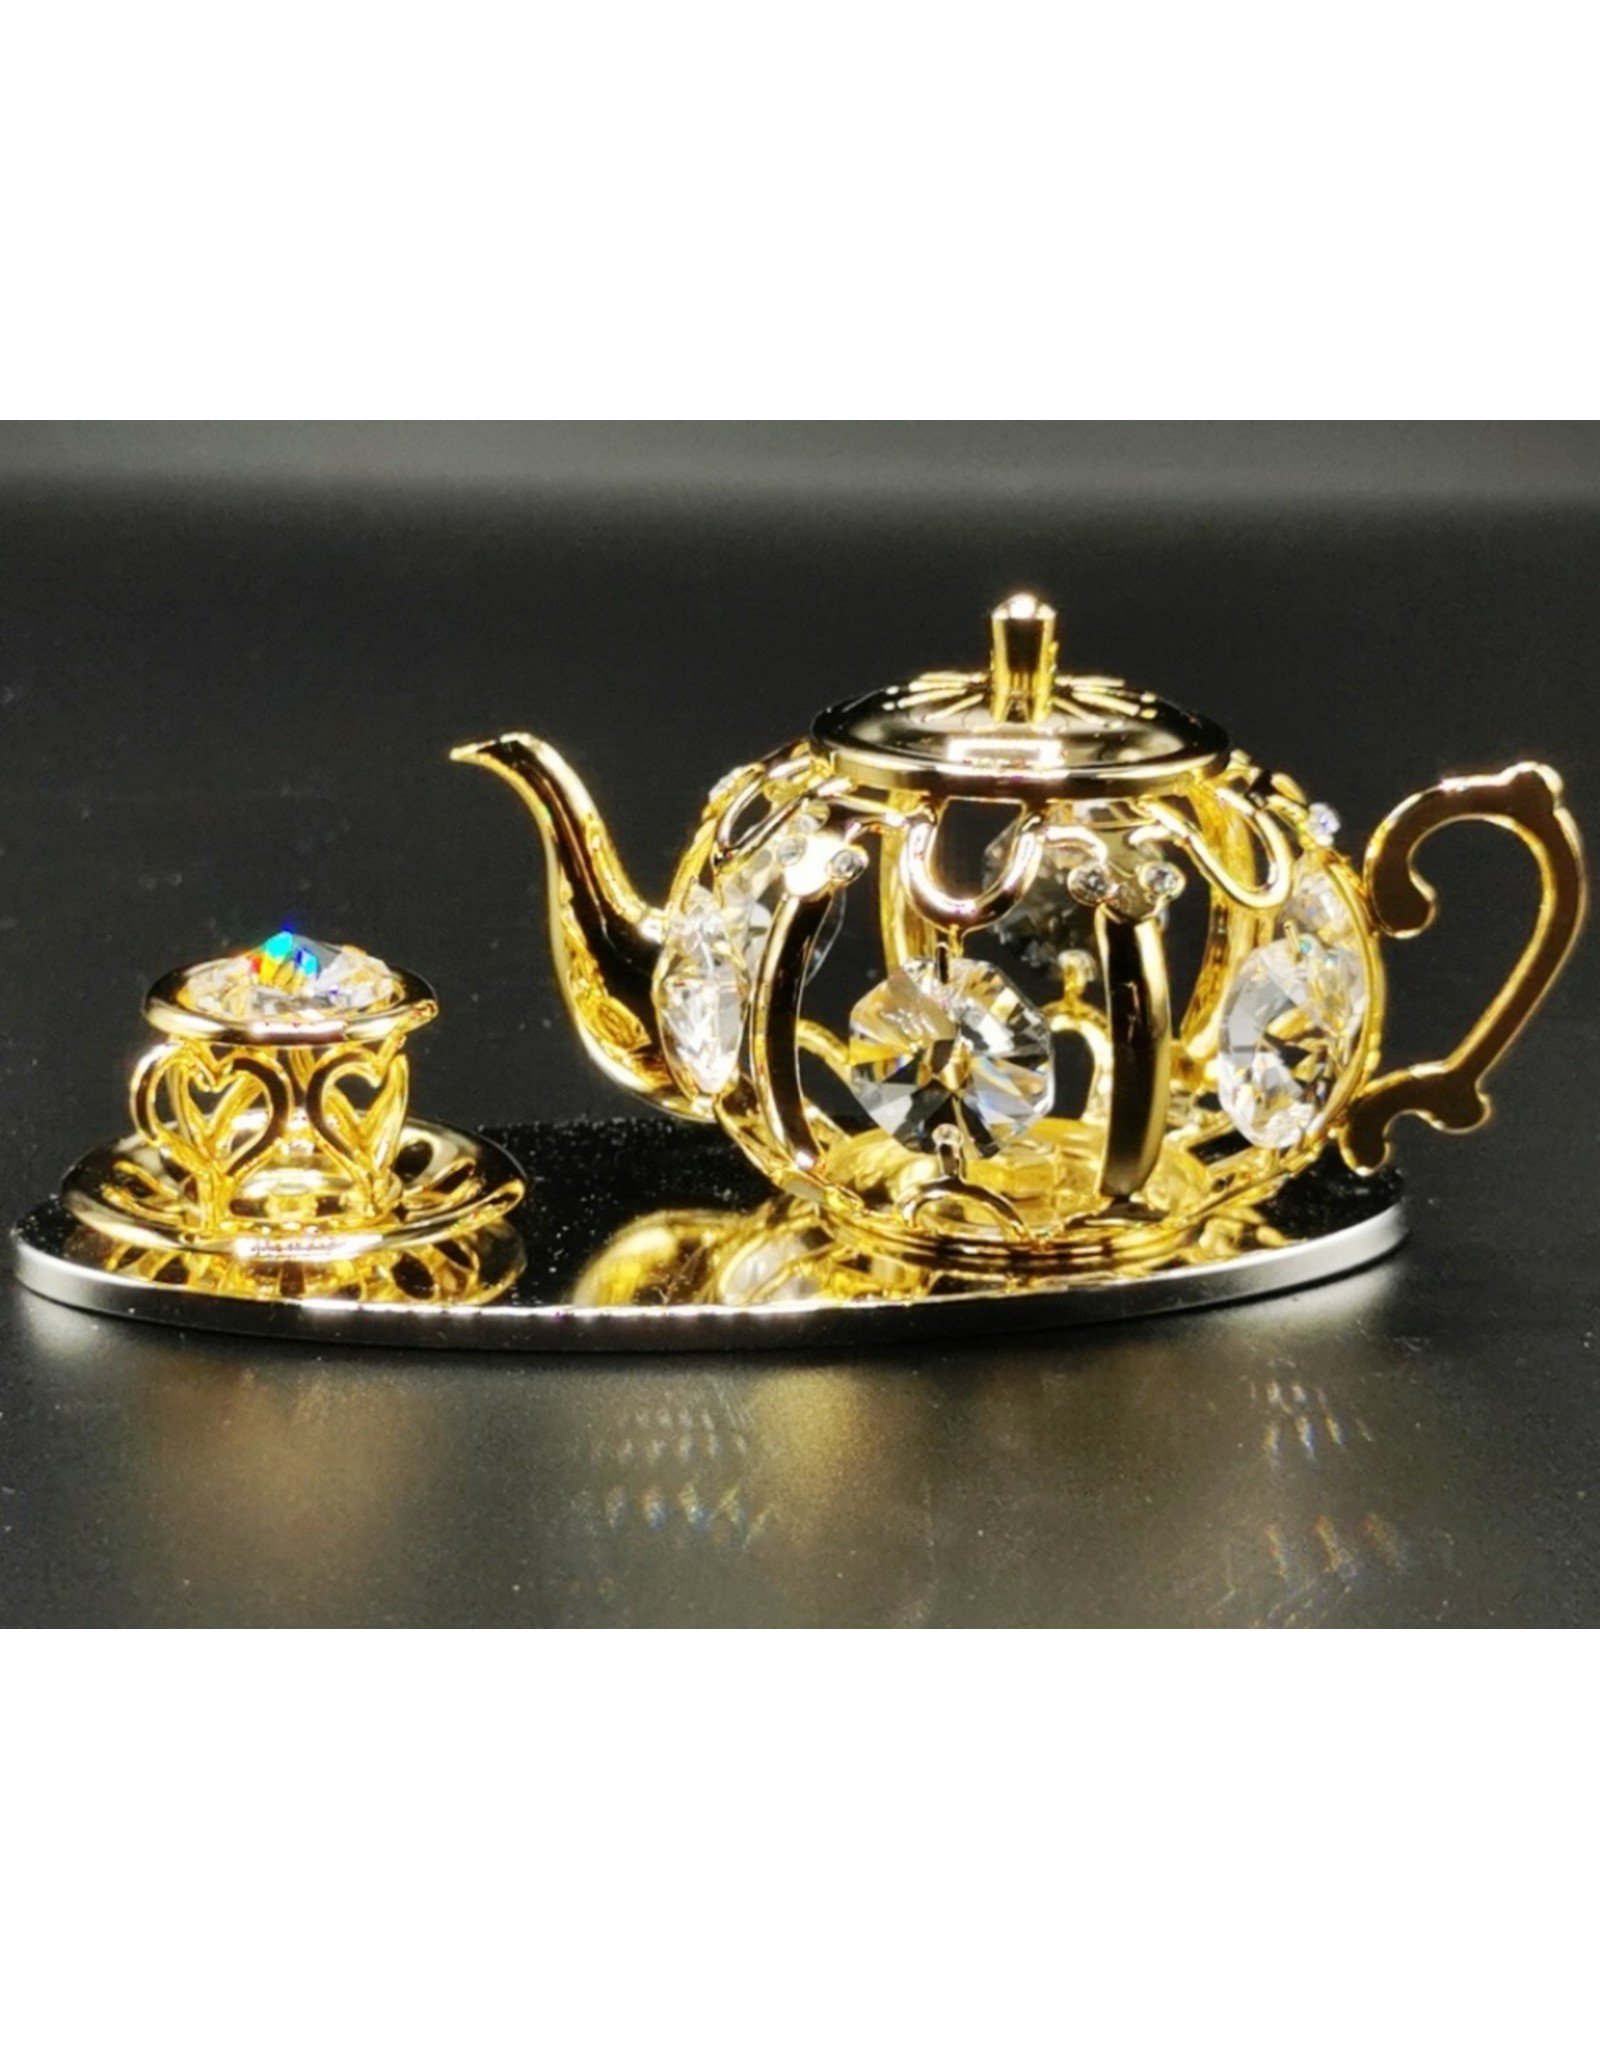 Crystal Temptations Miscellaneous - Miniature Tea Service. Gold-plated and with Swarovski